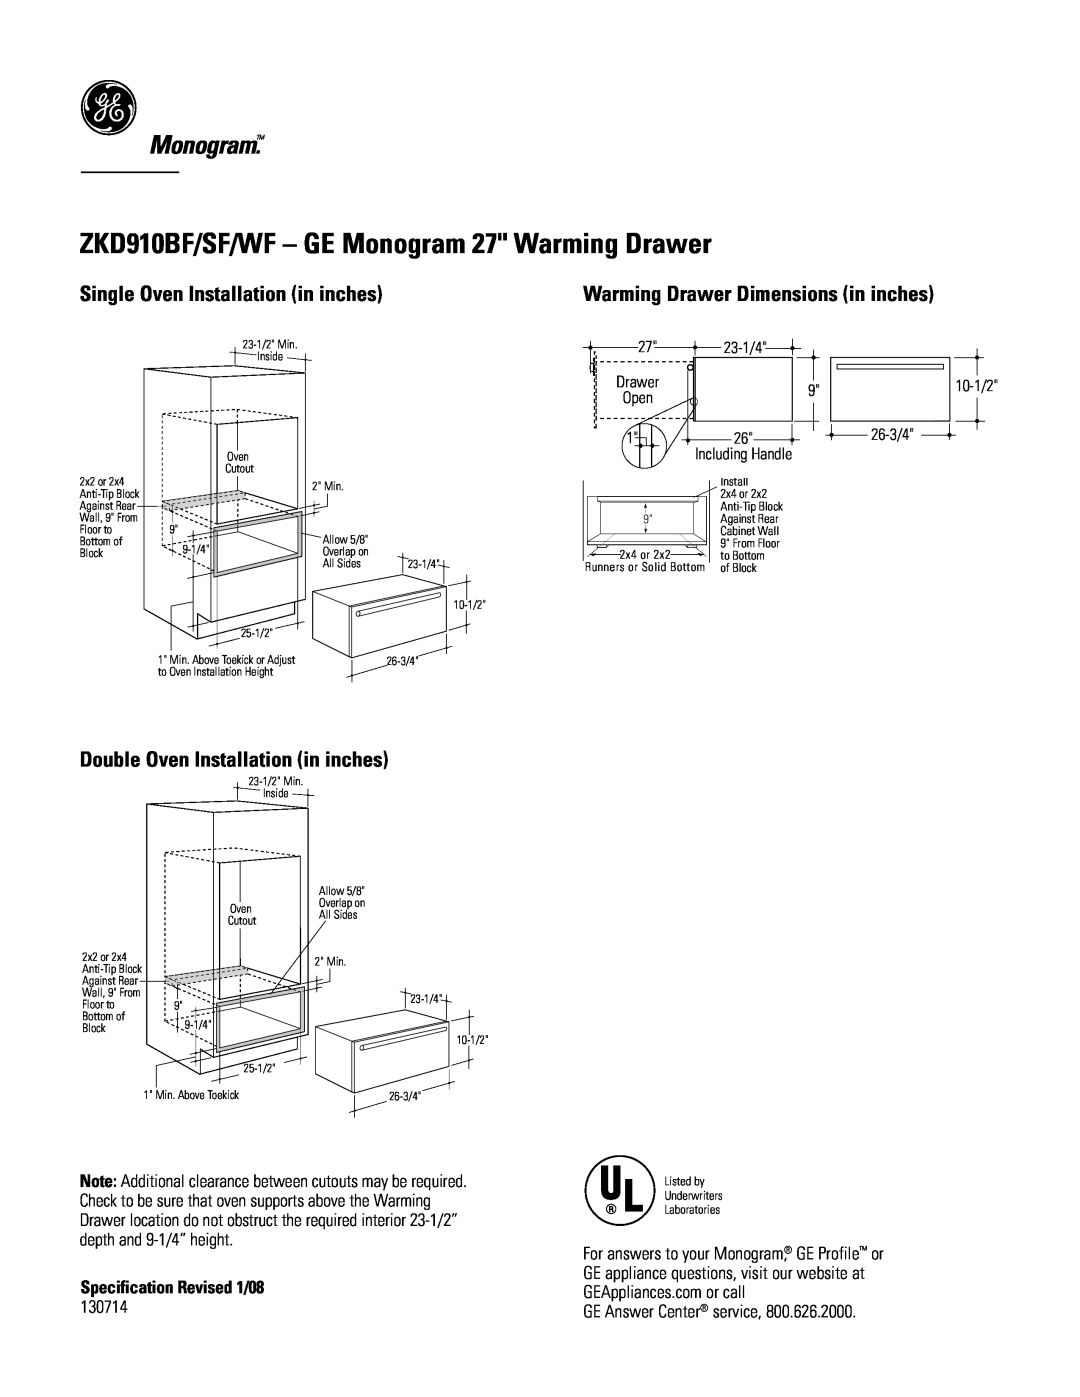 GE dimensions ZKD910BF/SF/WF - GE Monogram 27 Warming Drawer, Single Oven Installation in inches, 23-1/4, 10-1/2 